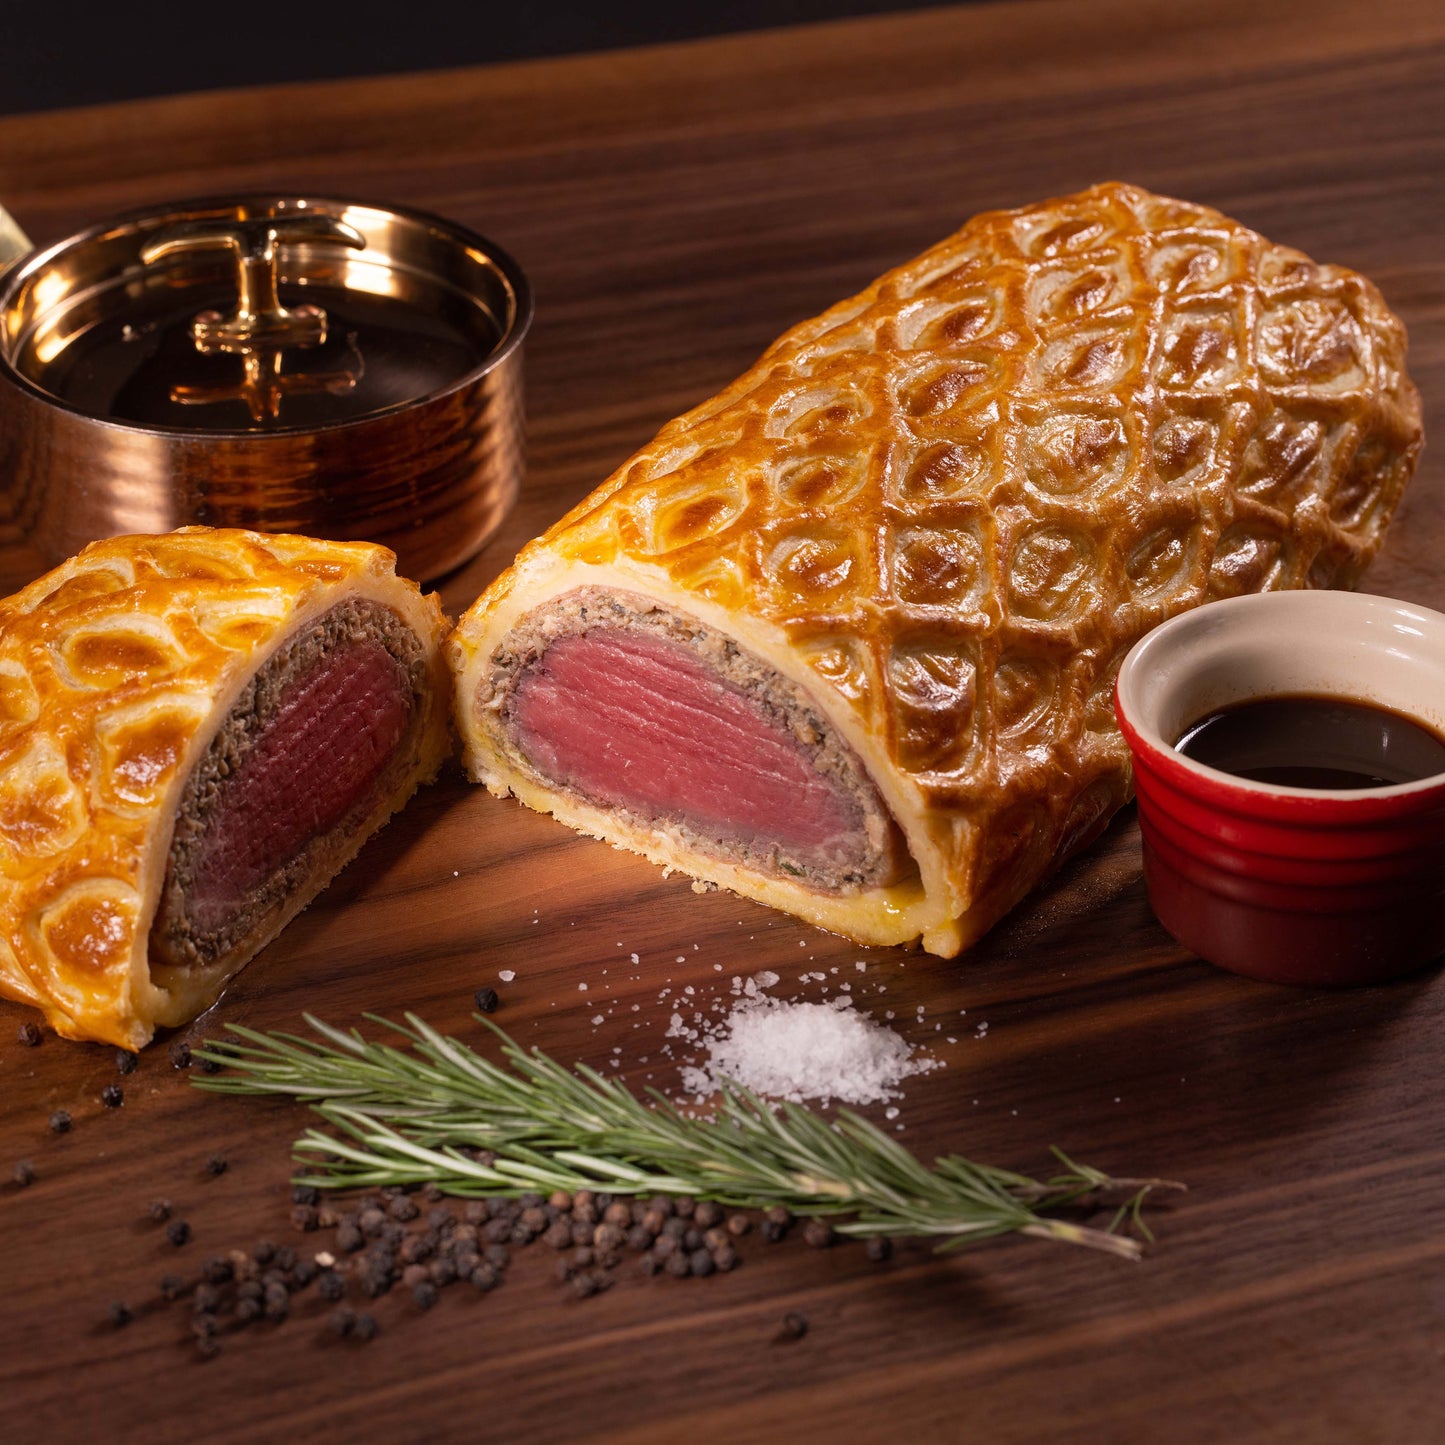 Classic Beef Wellington with Green Peppercorn Sauce + 4 Side Dishes (For 4 - 5 Persons) 經典威靈頓牛排佐綠胡椒醬汁伴四款配菜 (供四至五人享用)